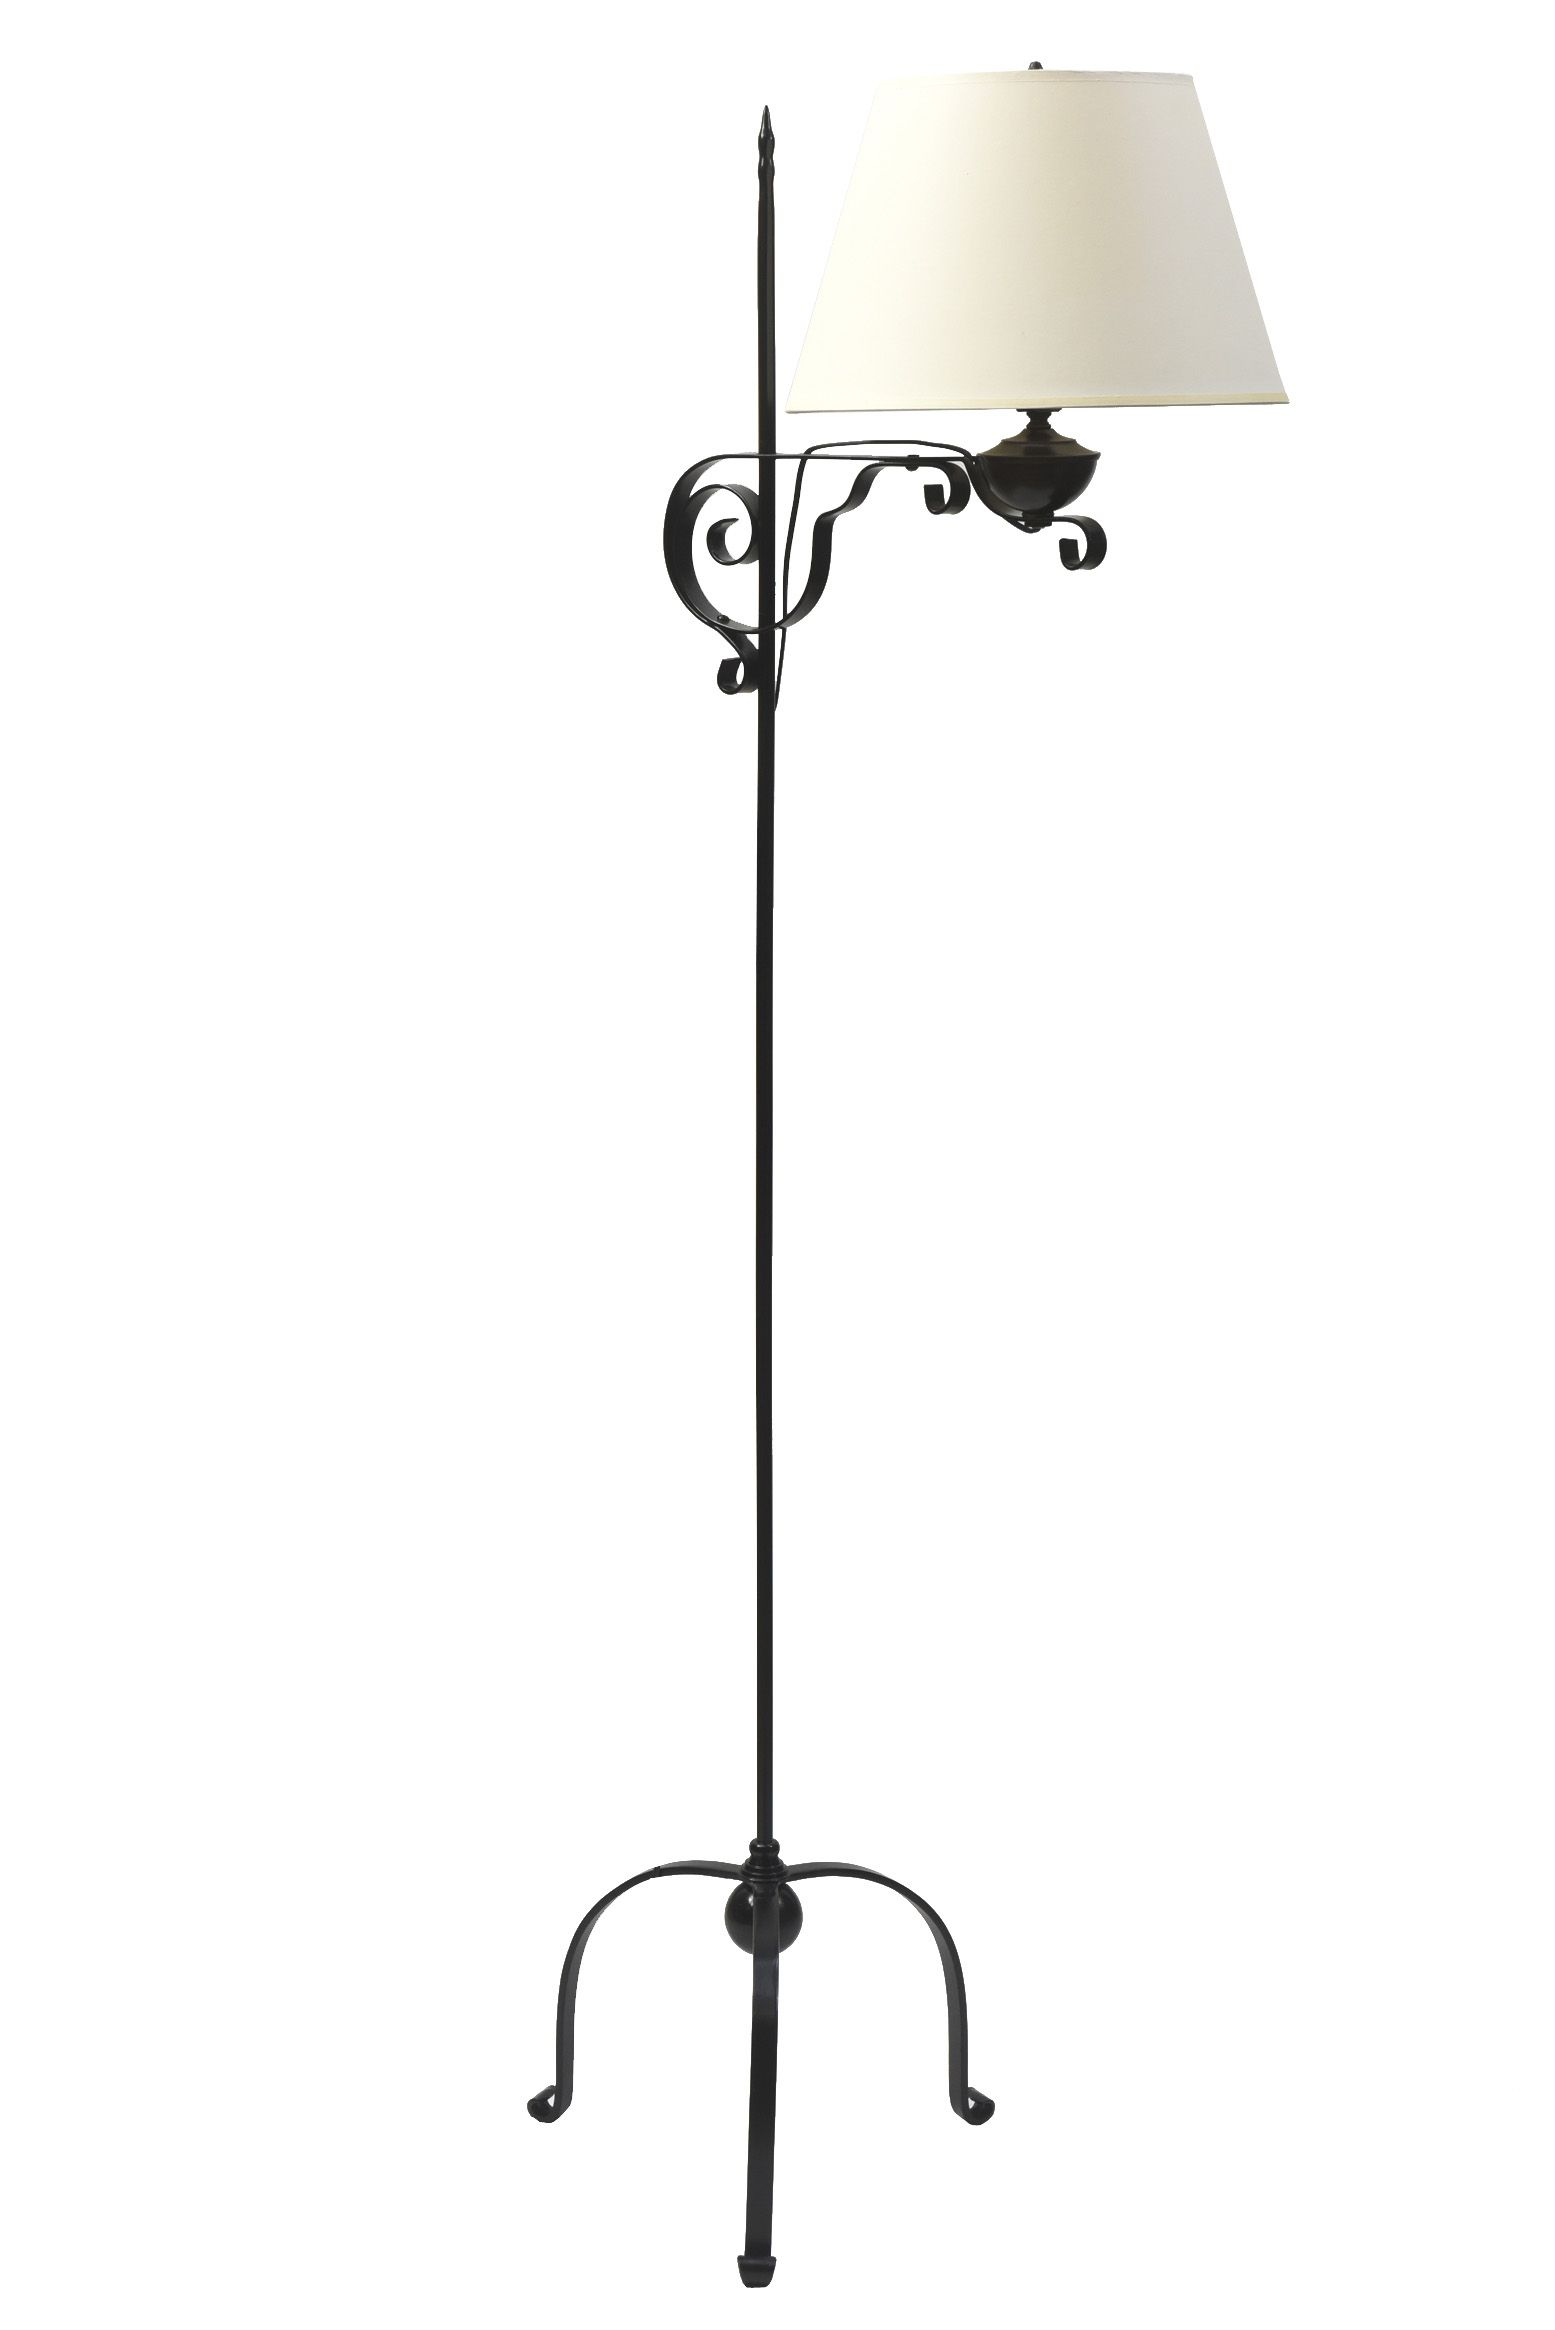 Sold Colonial Style Iron Bridge Lamp Antique Lighting intended for size 1555 X 2330